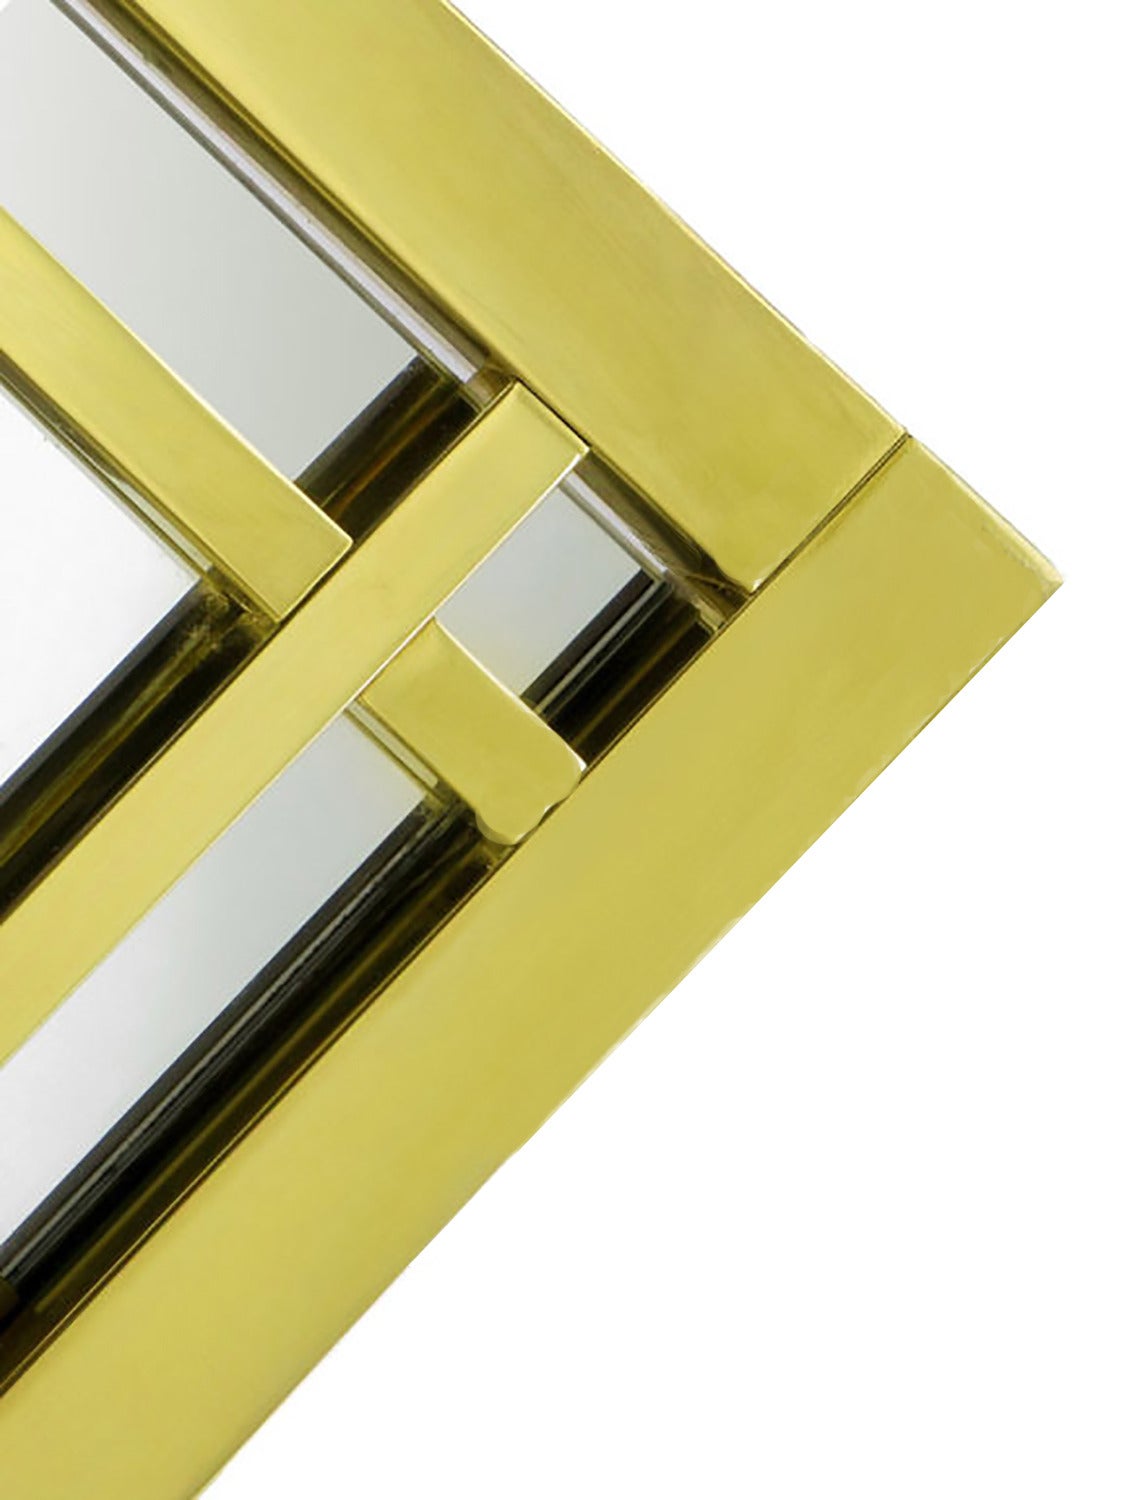 American Brass Double Framed Mirror in the Style of Pierre Cardin For Sale